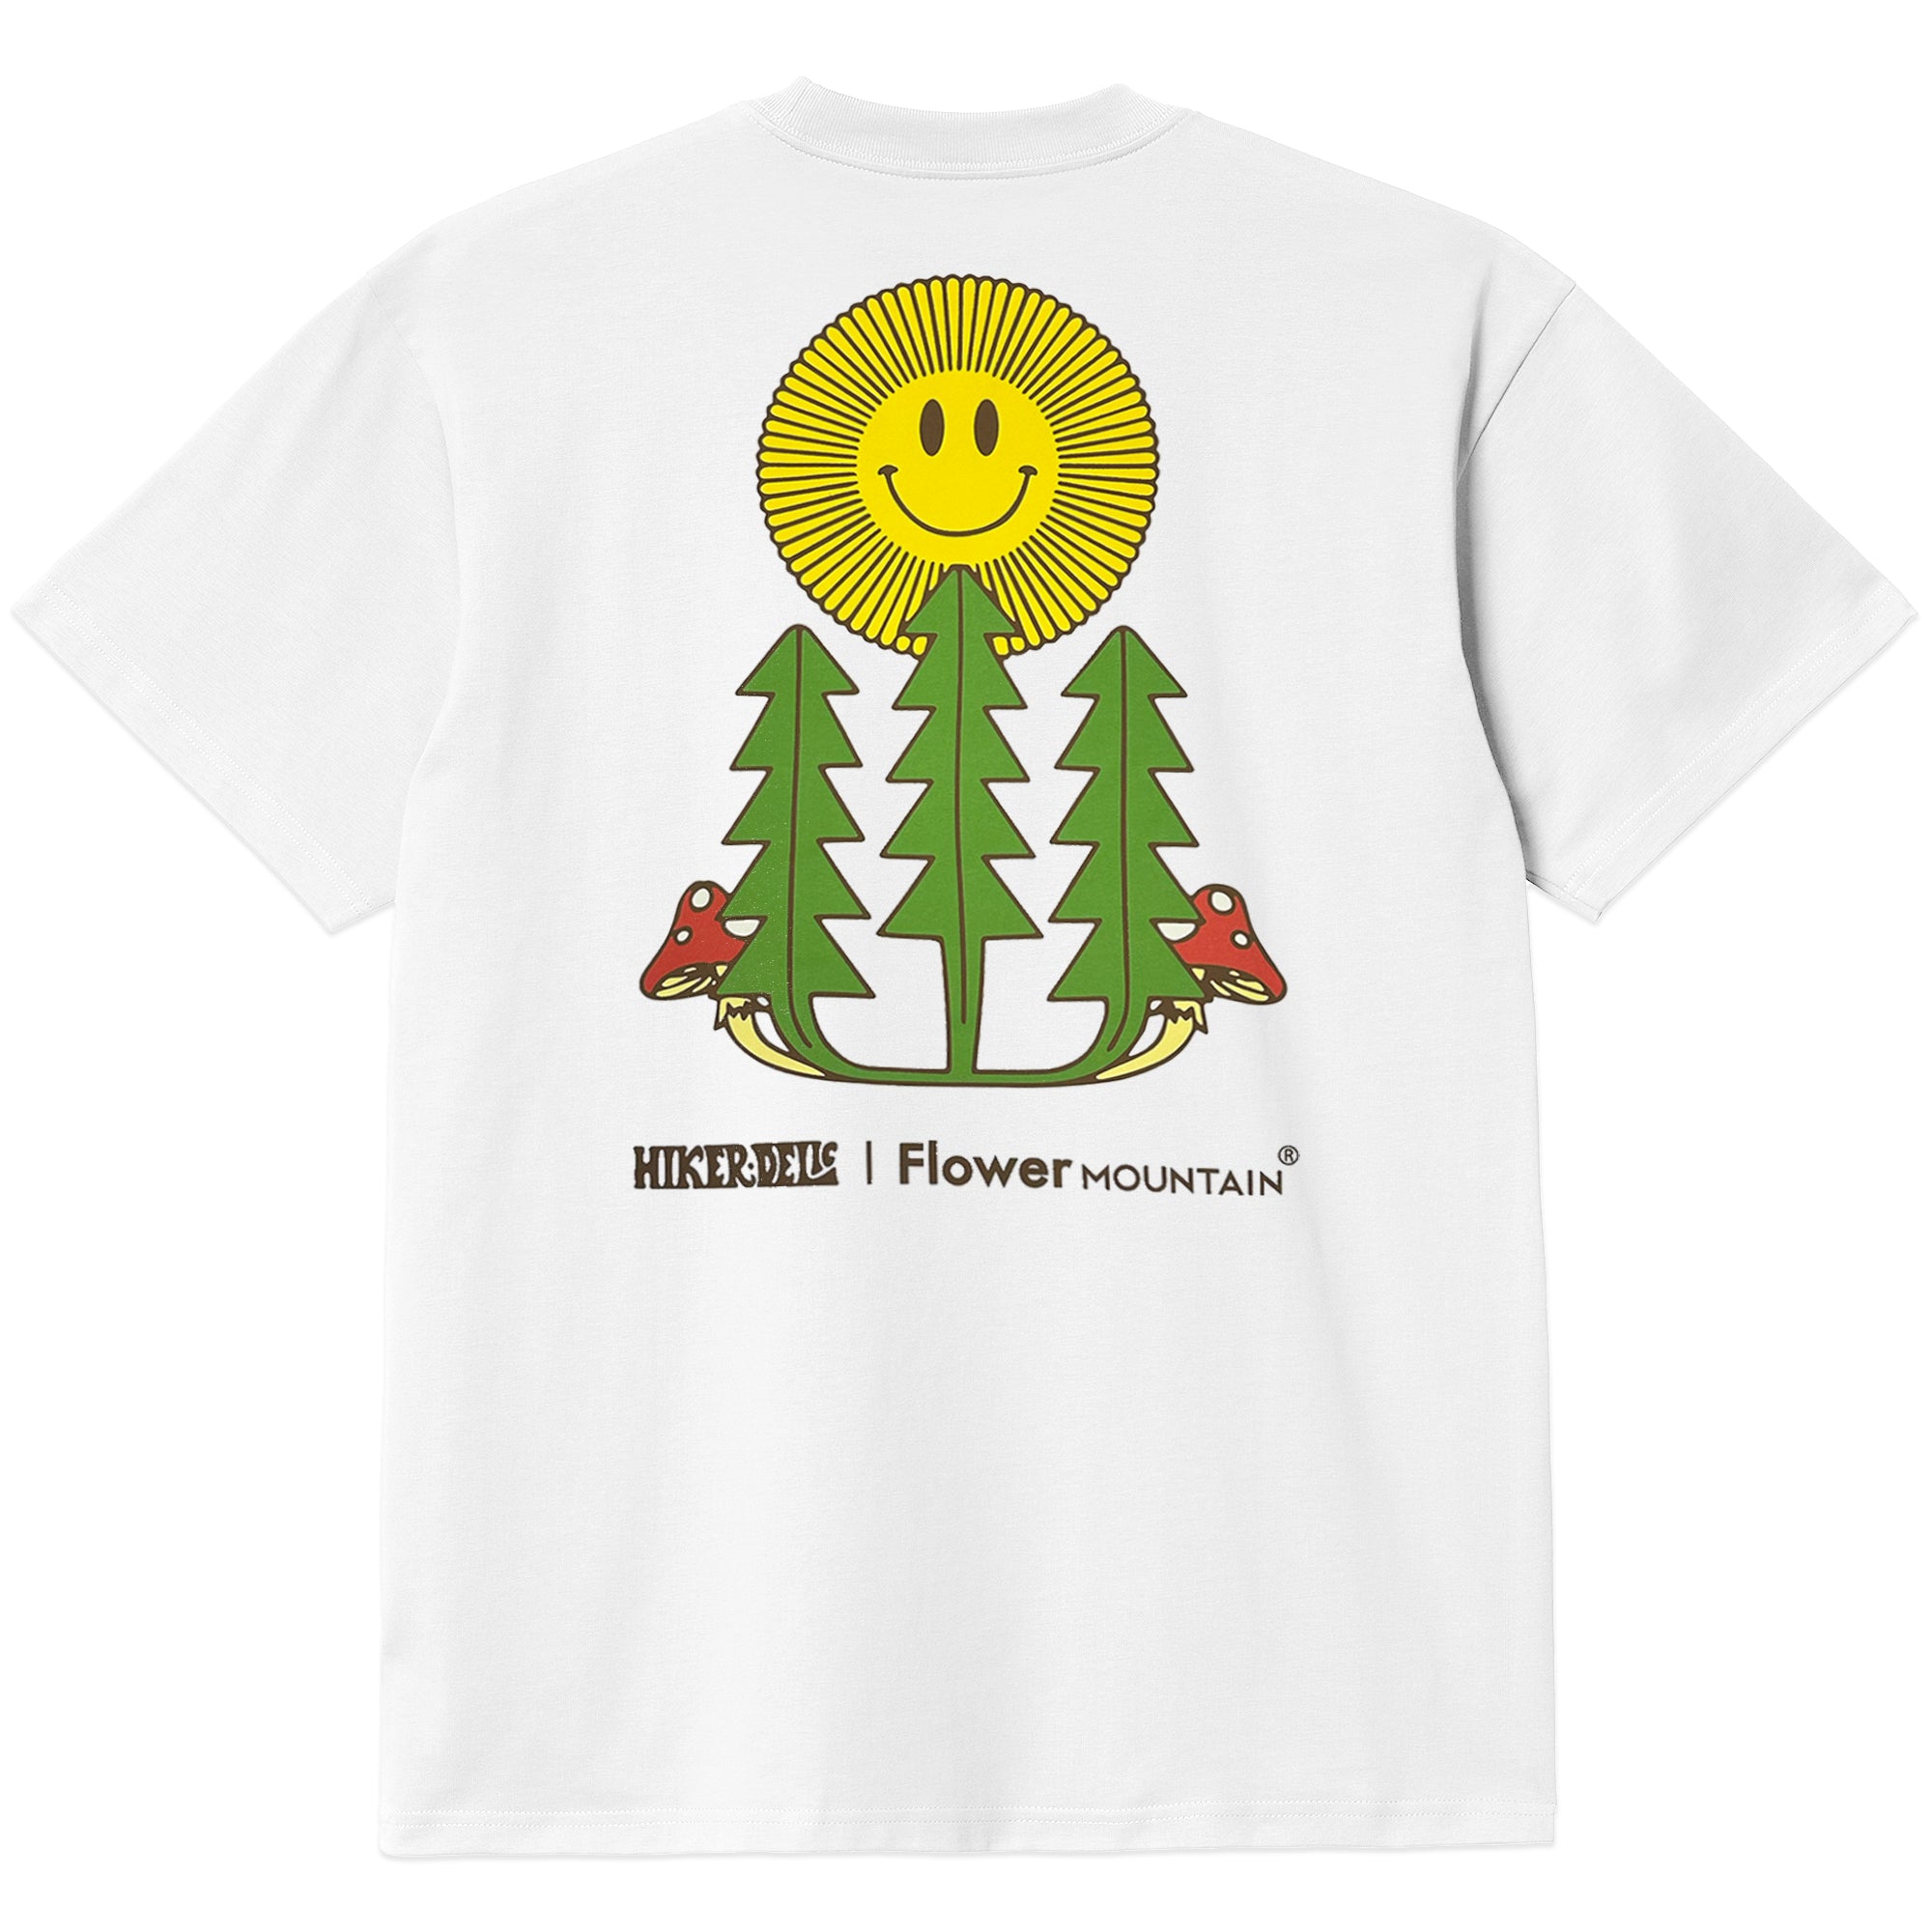 Hikerdelic x Flower Mountain Personal Growth T-Shirt - White